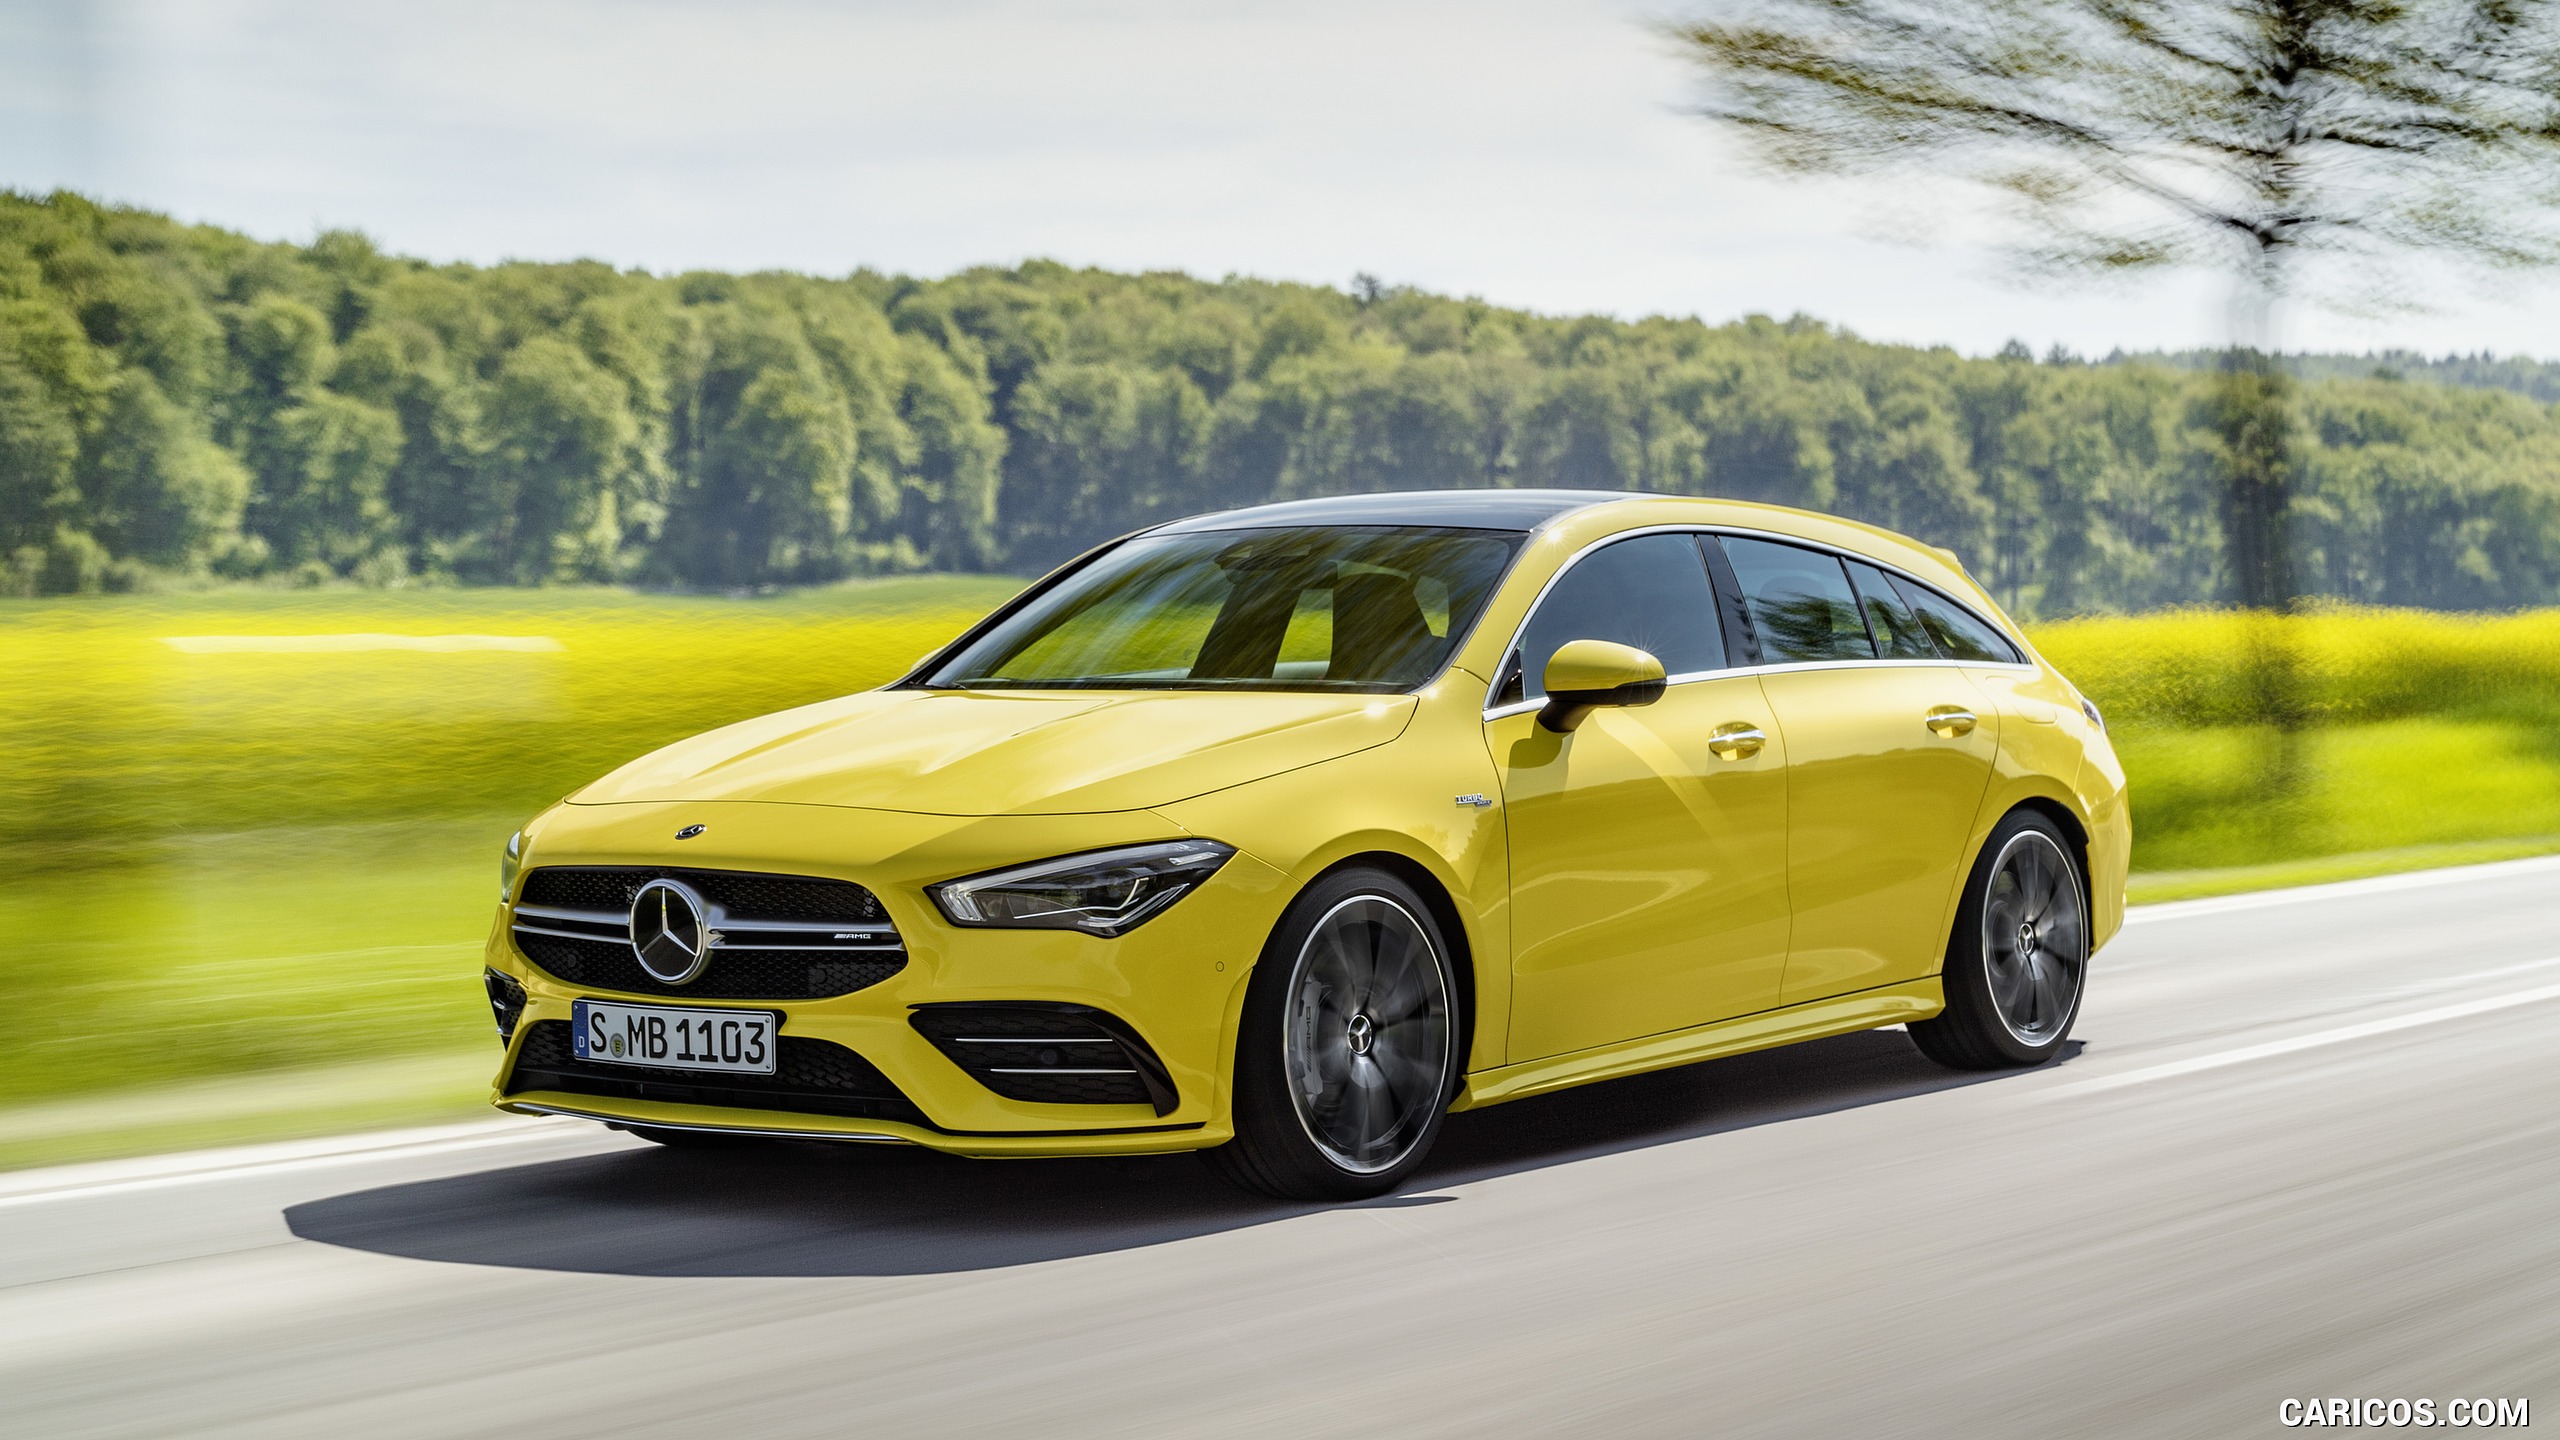 2020 Mercedes-AMG CLA 35 4MATIC Shooting Brake - Front Three-Quarter, #4 of 21